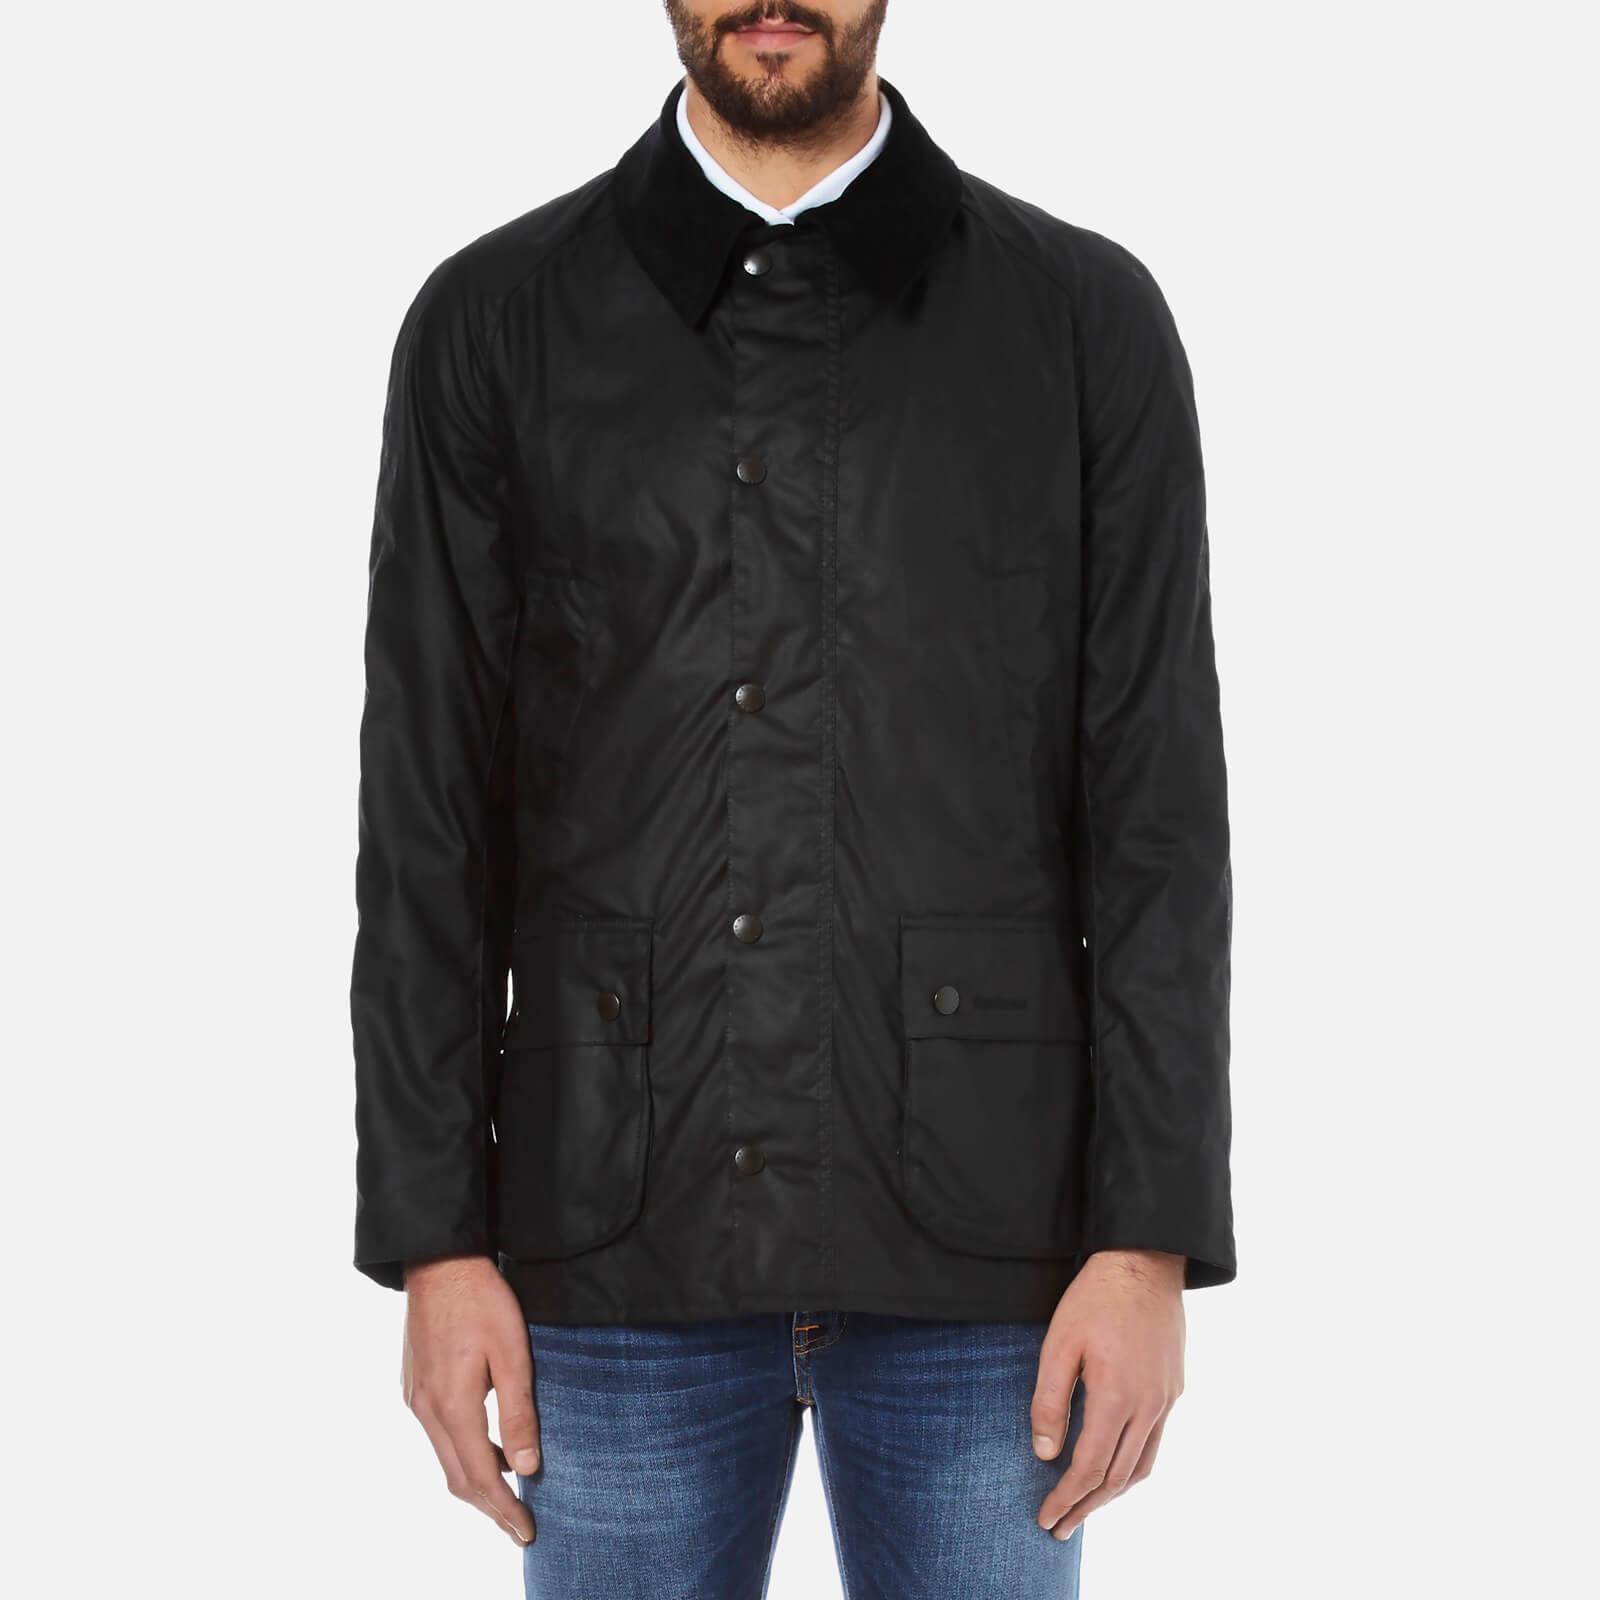 Barbour Cotton Ashby Wax Jacket in Black for Men - Save 29% - Lyst